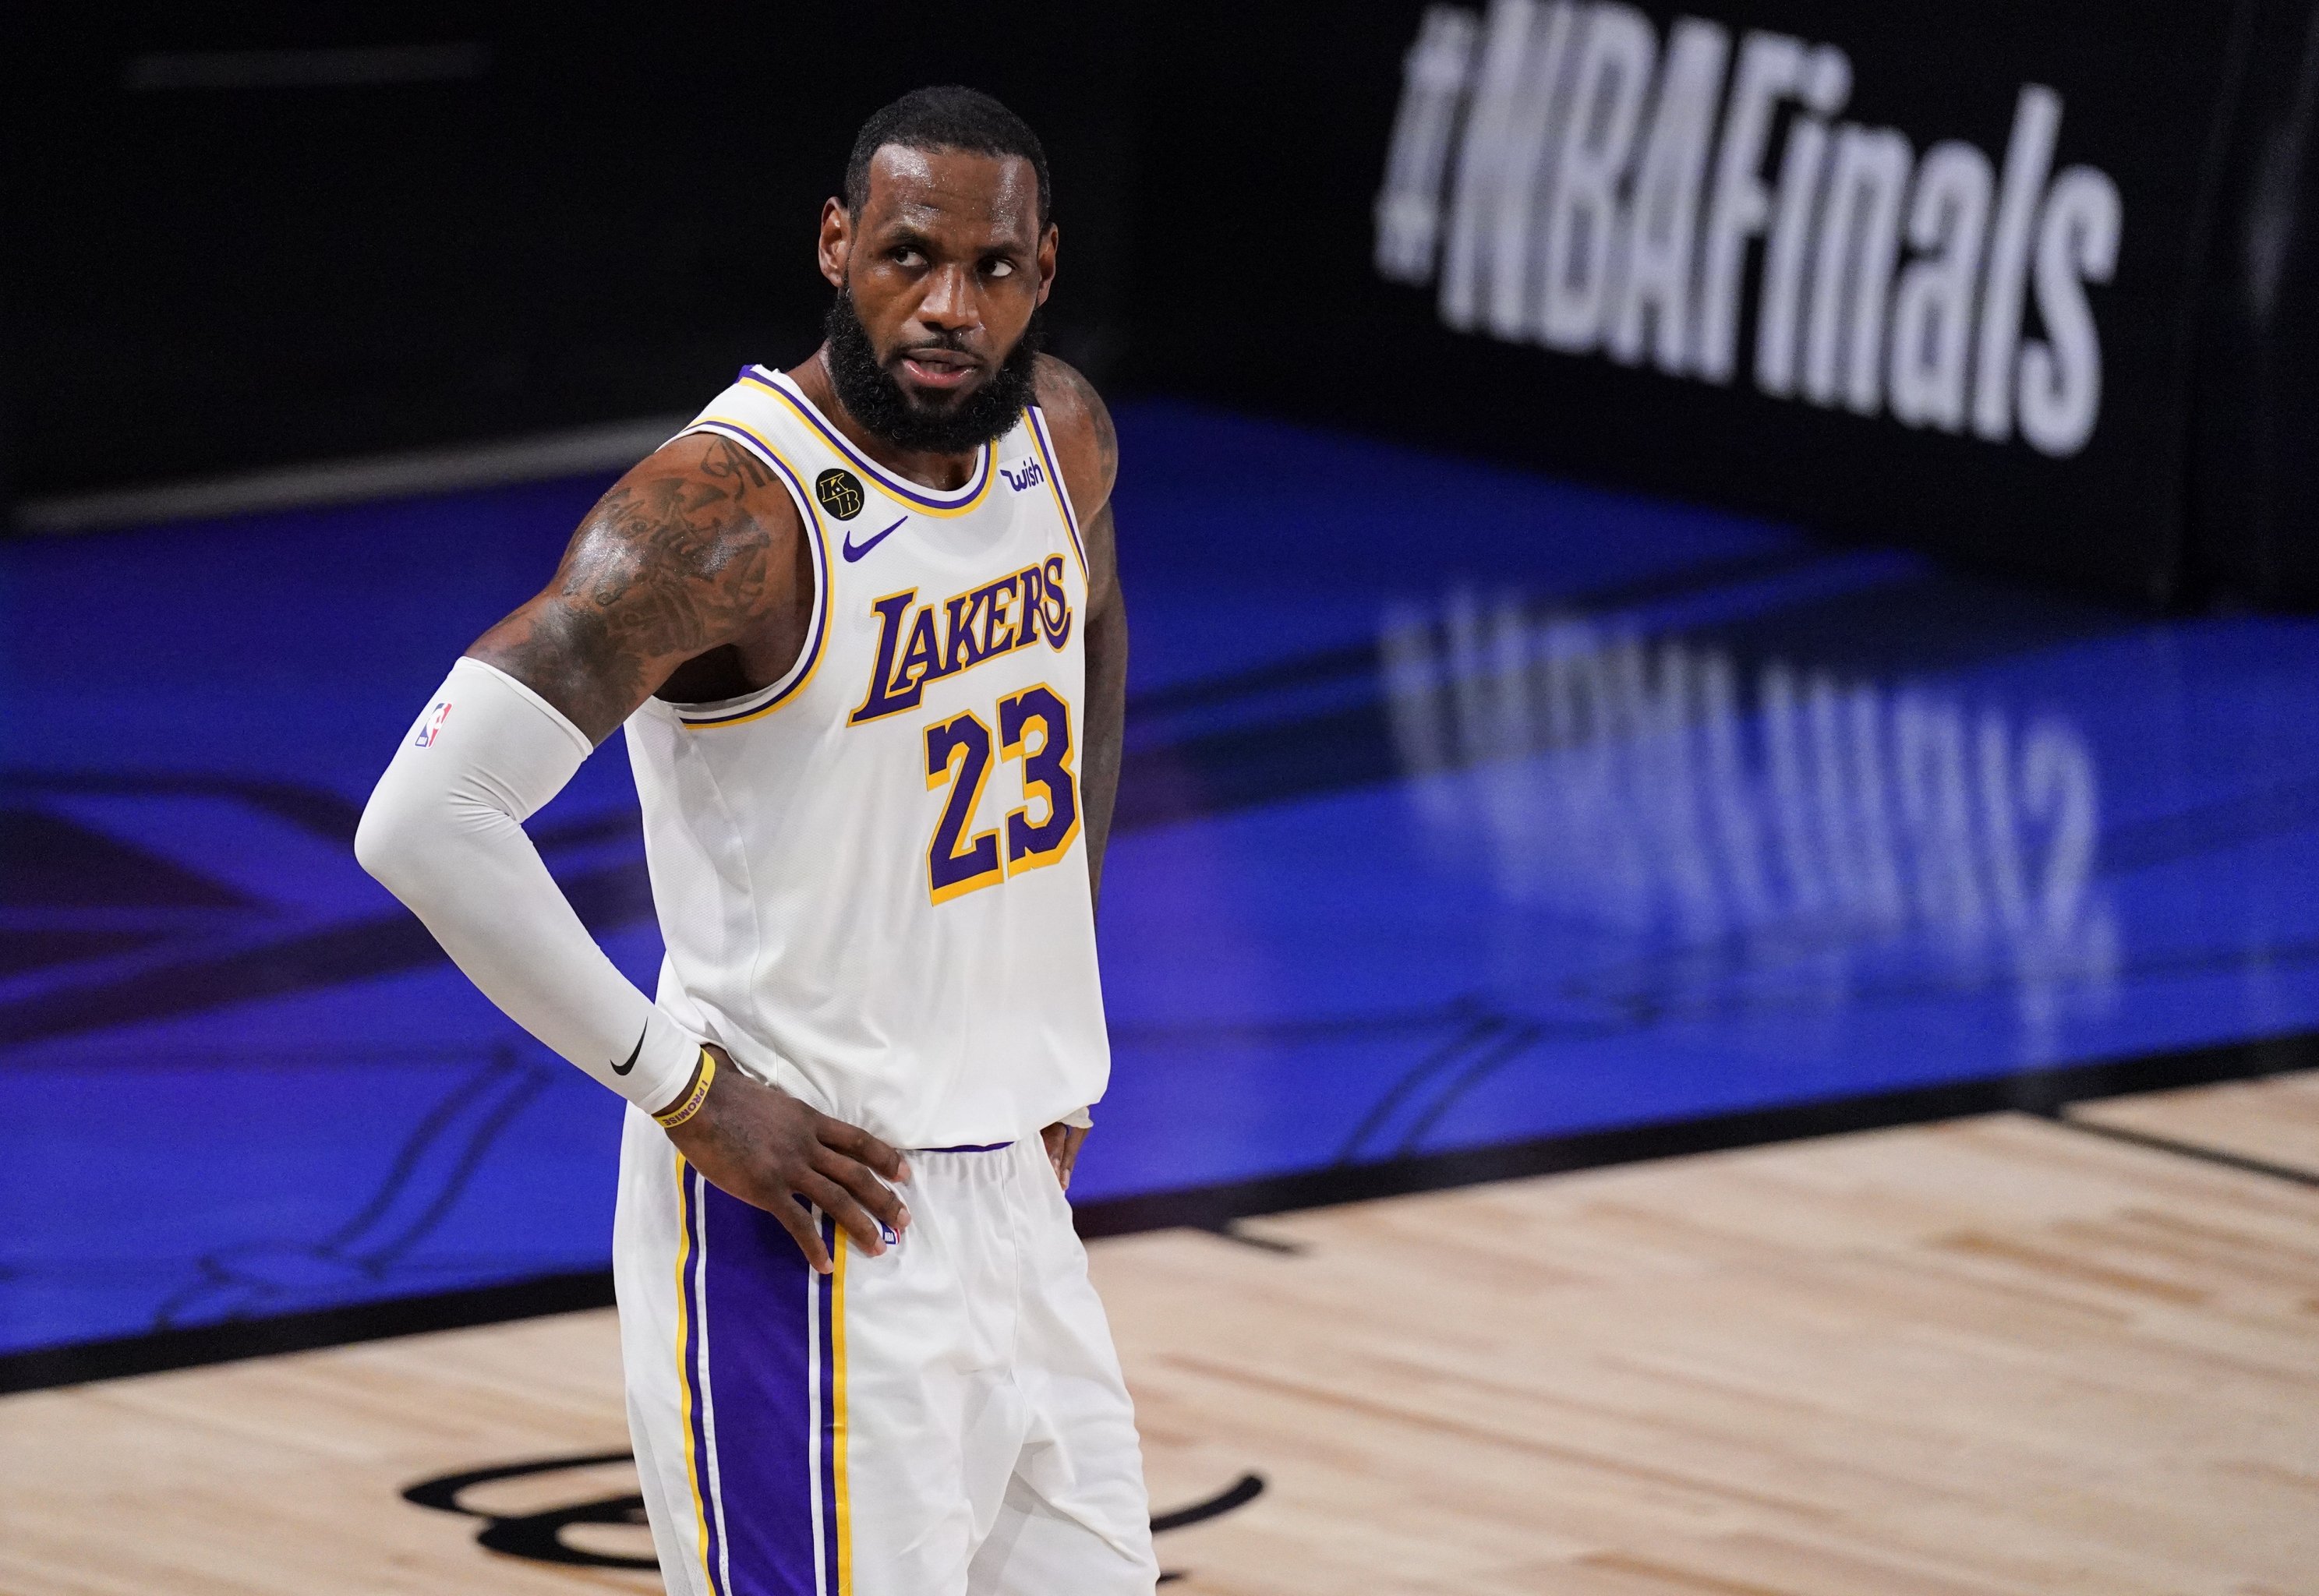 Lakers news: LeBron James denied chance to play with DeMarcus